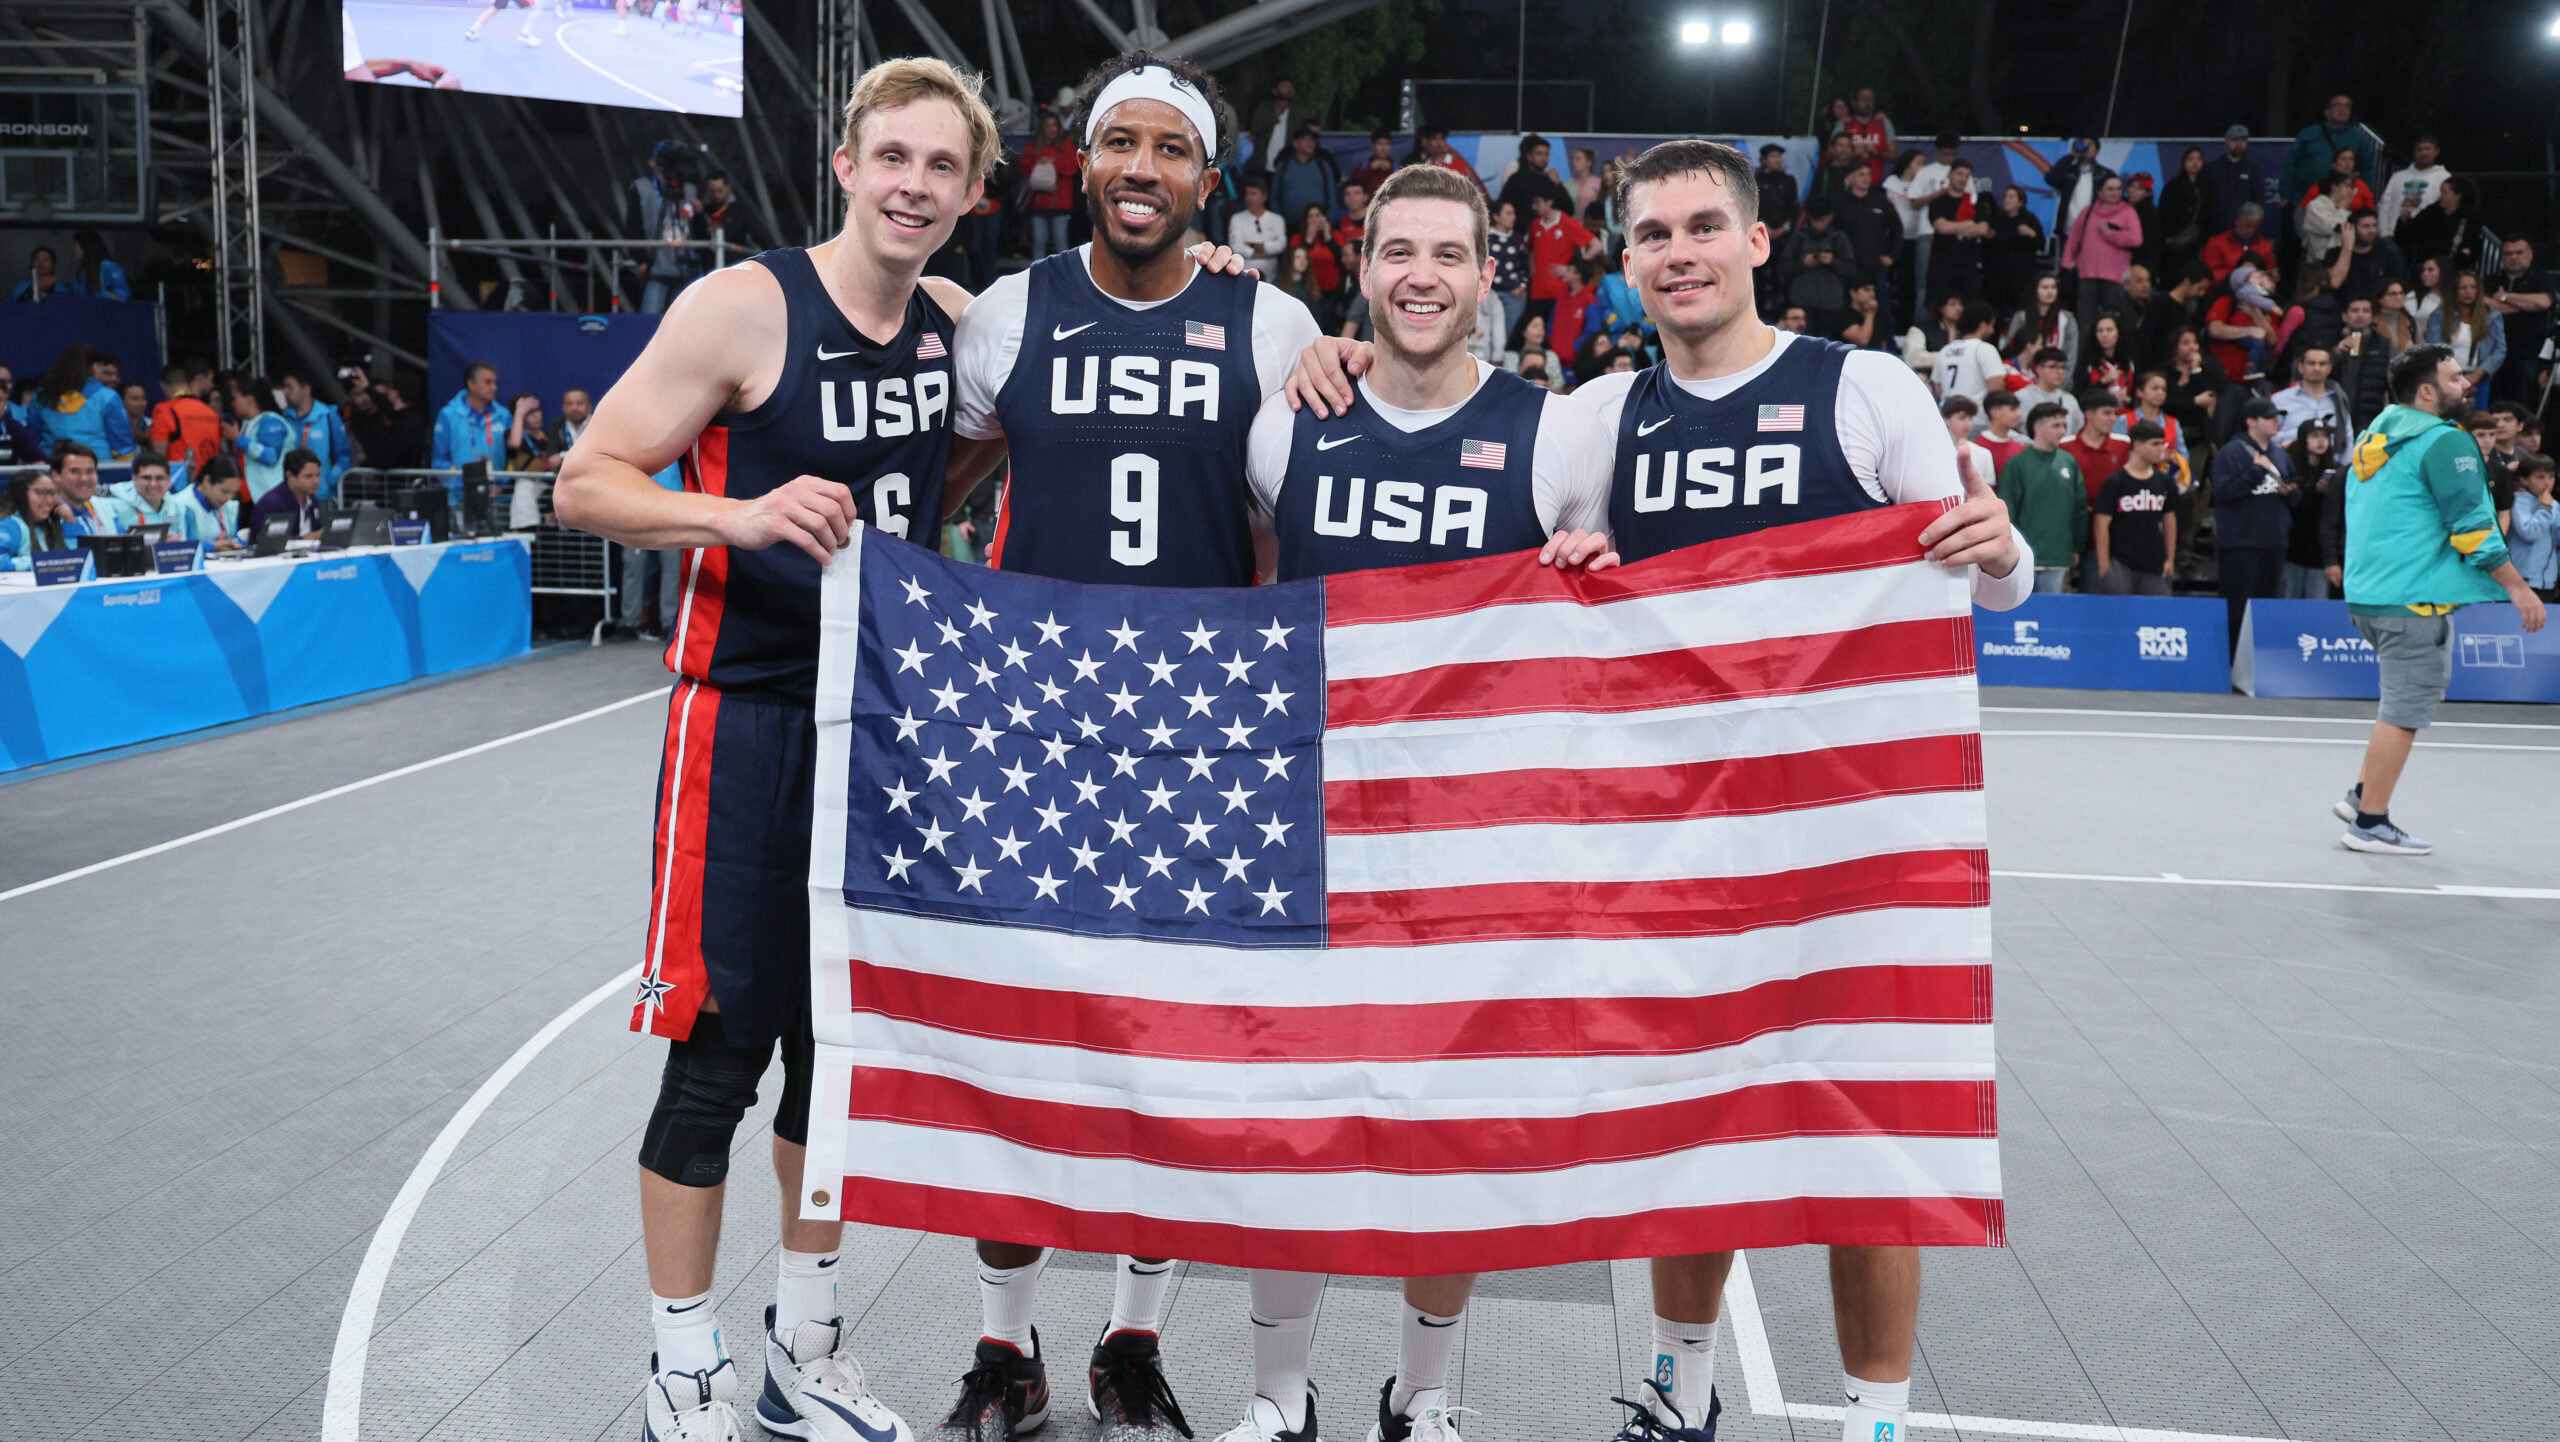 BYU Legend Jimmer Fredette Joins TODAY Show To Talk 3x3 Basketball At Paris Olympics